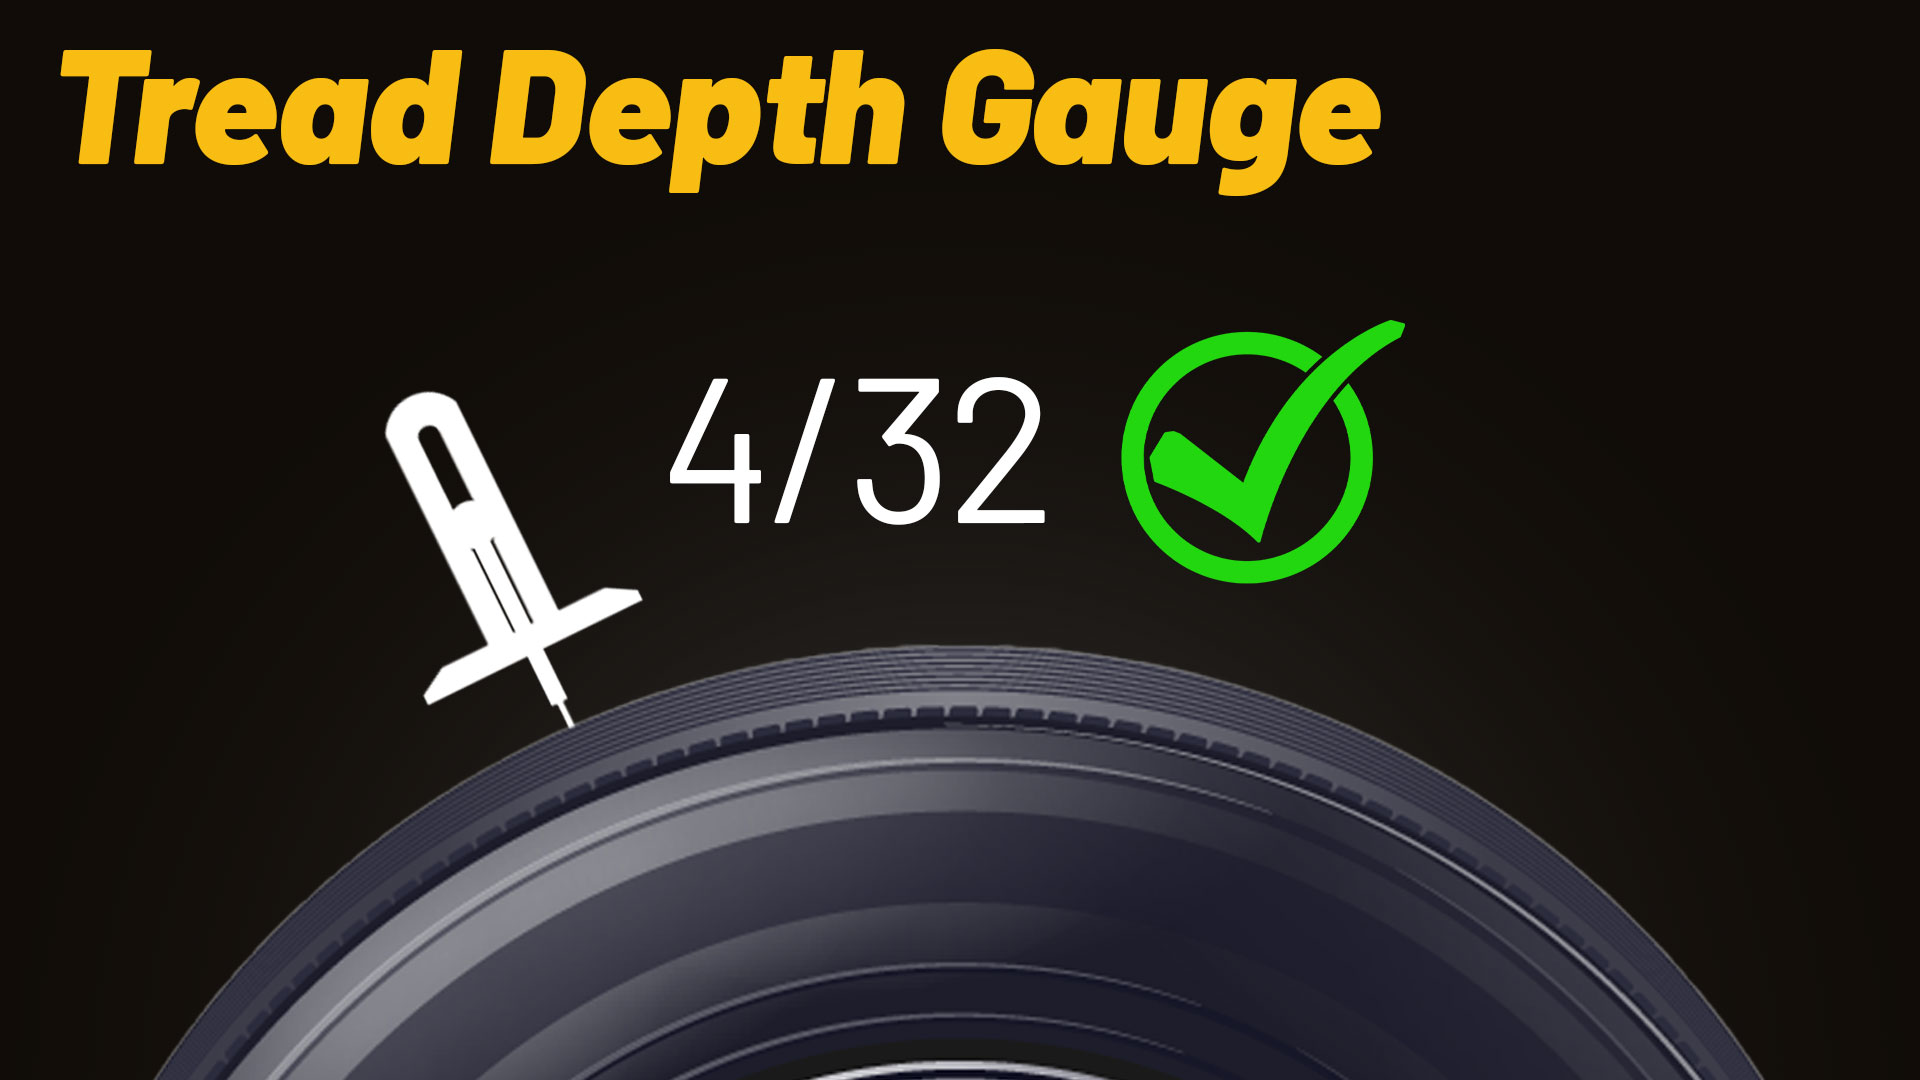 How to measure tread depth with a depth gauge